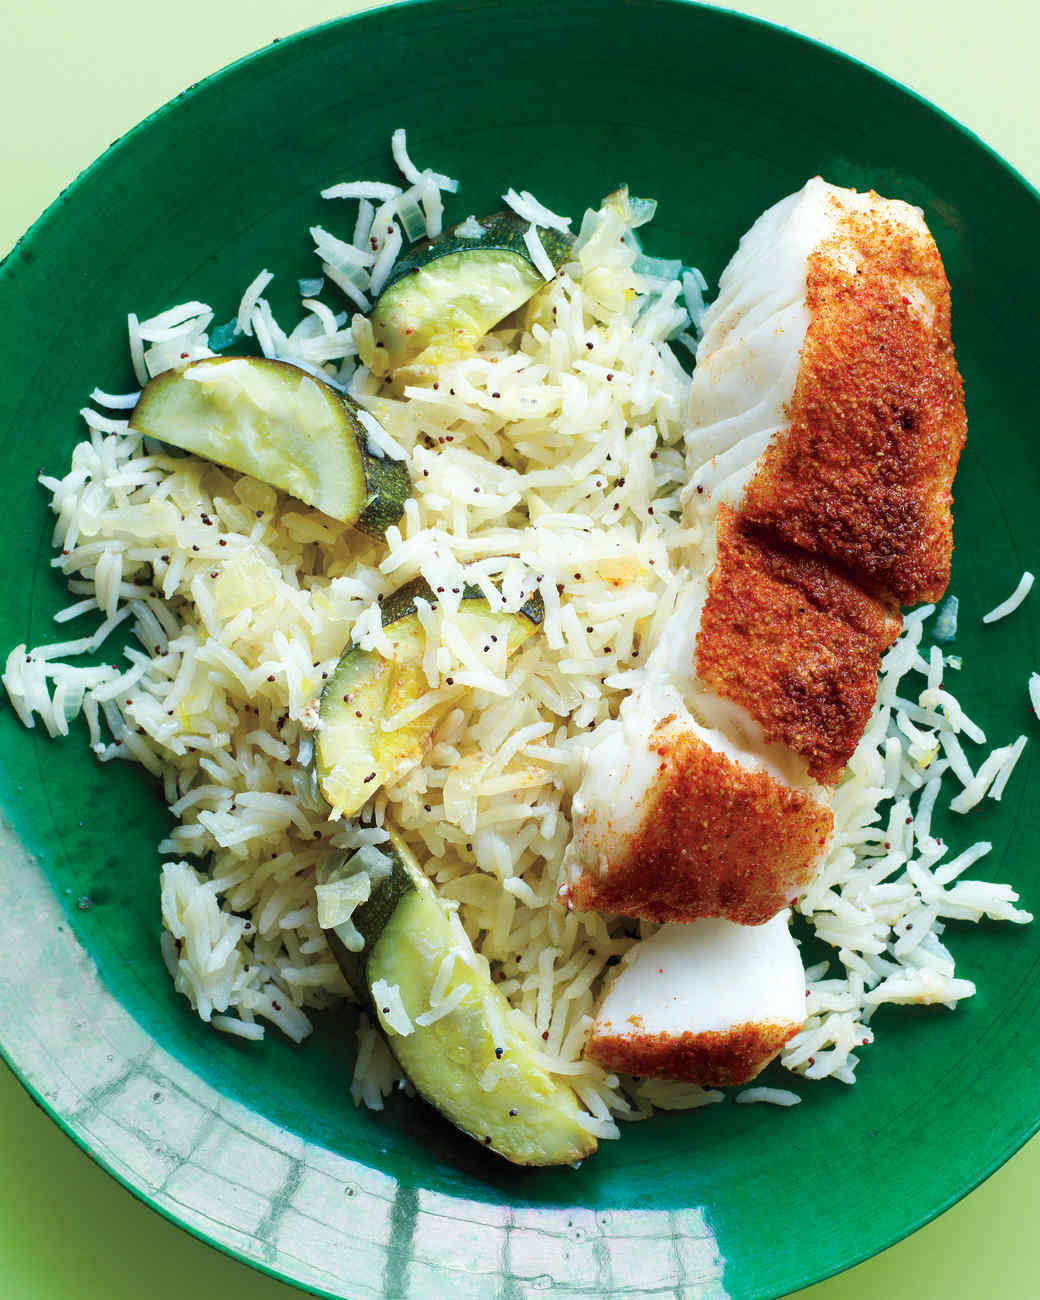 Rice Recipes For Fish
 Spice Rubbed Fish with Lemony Rice Recipe & Video